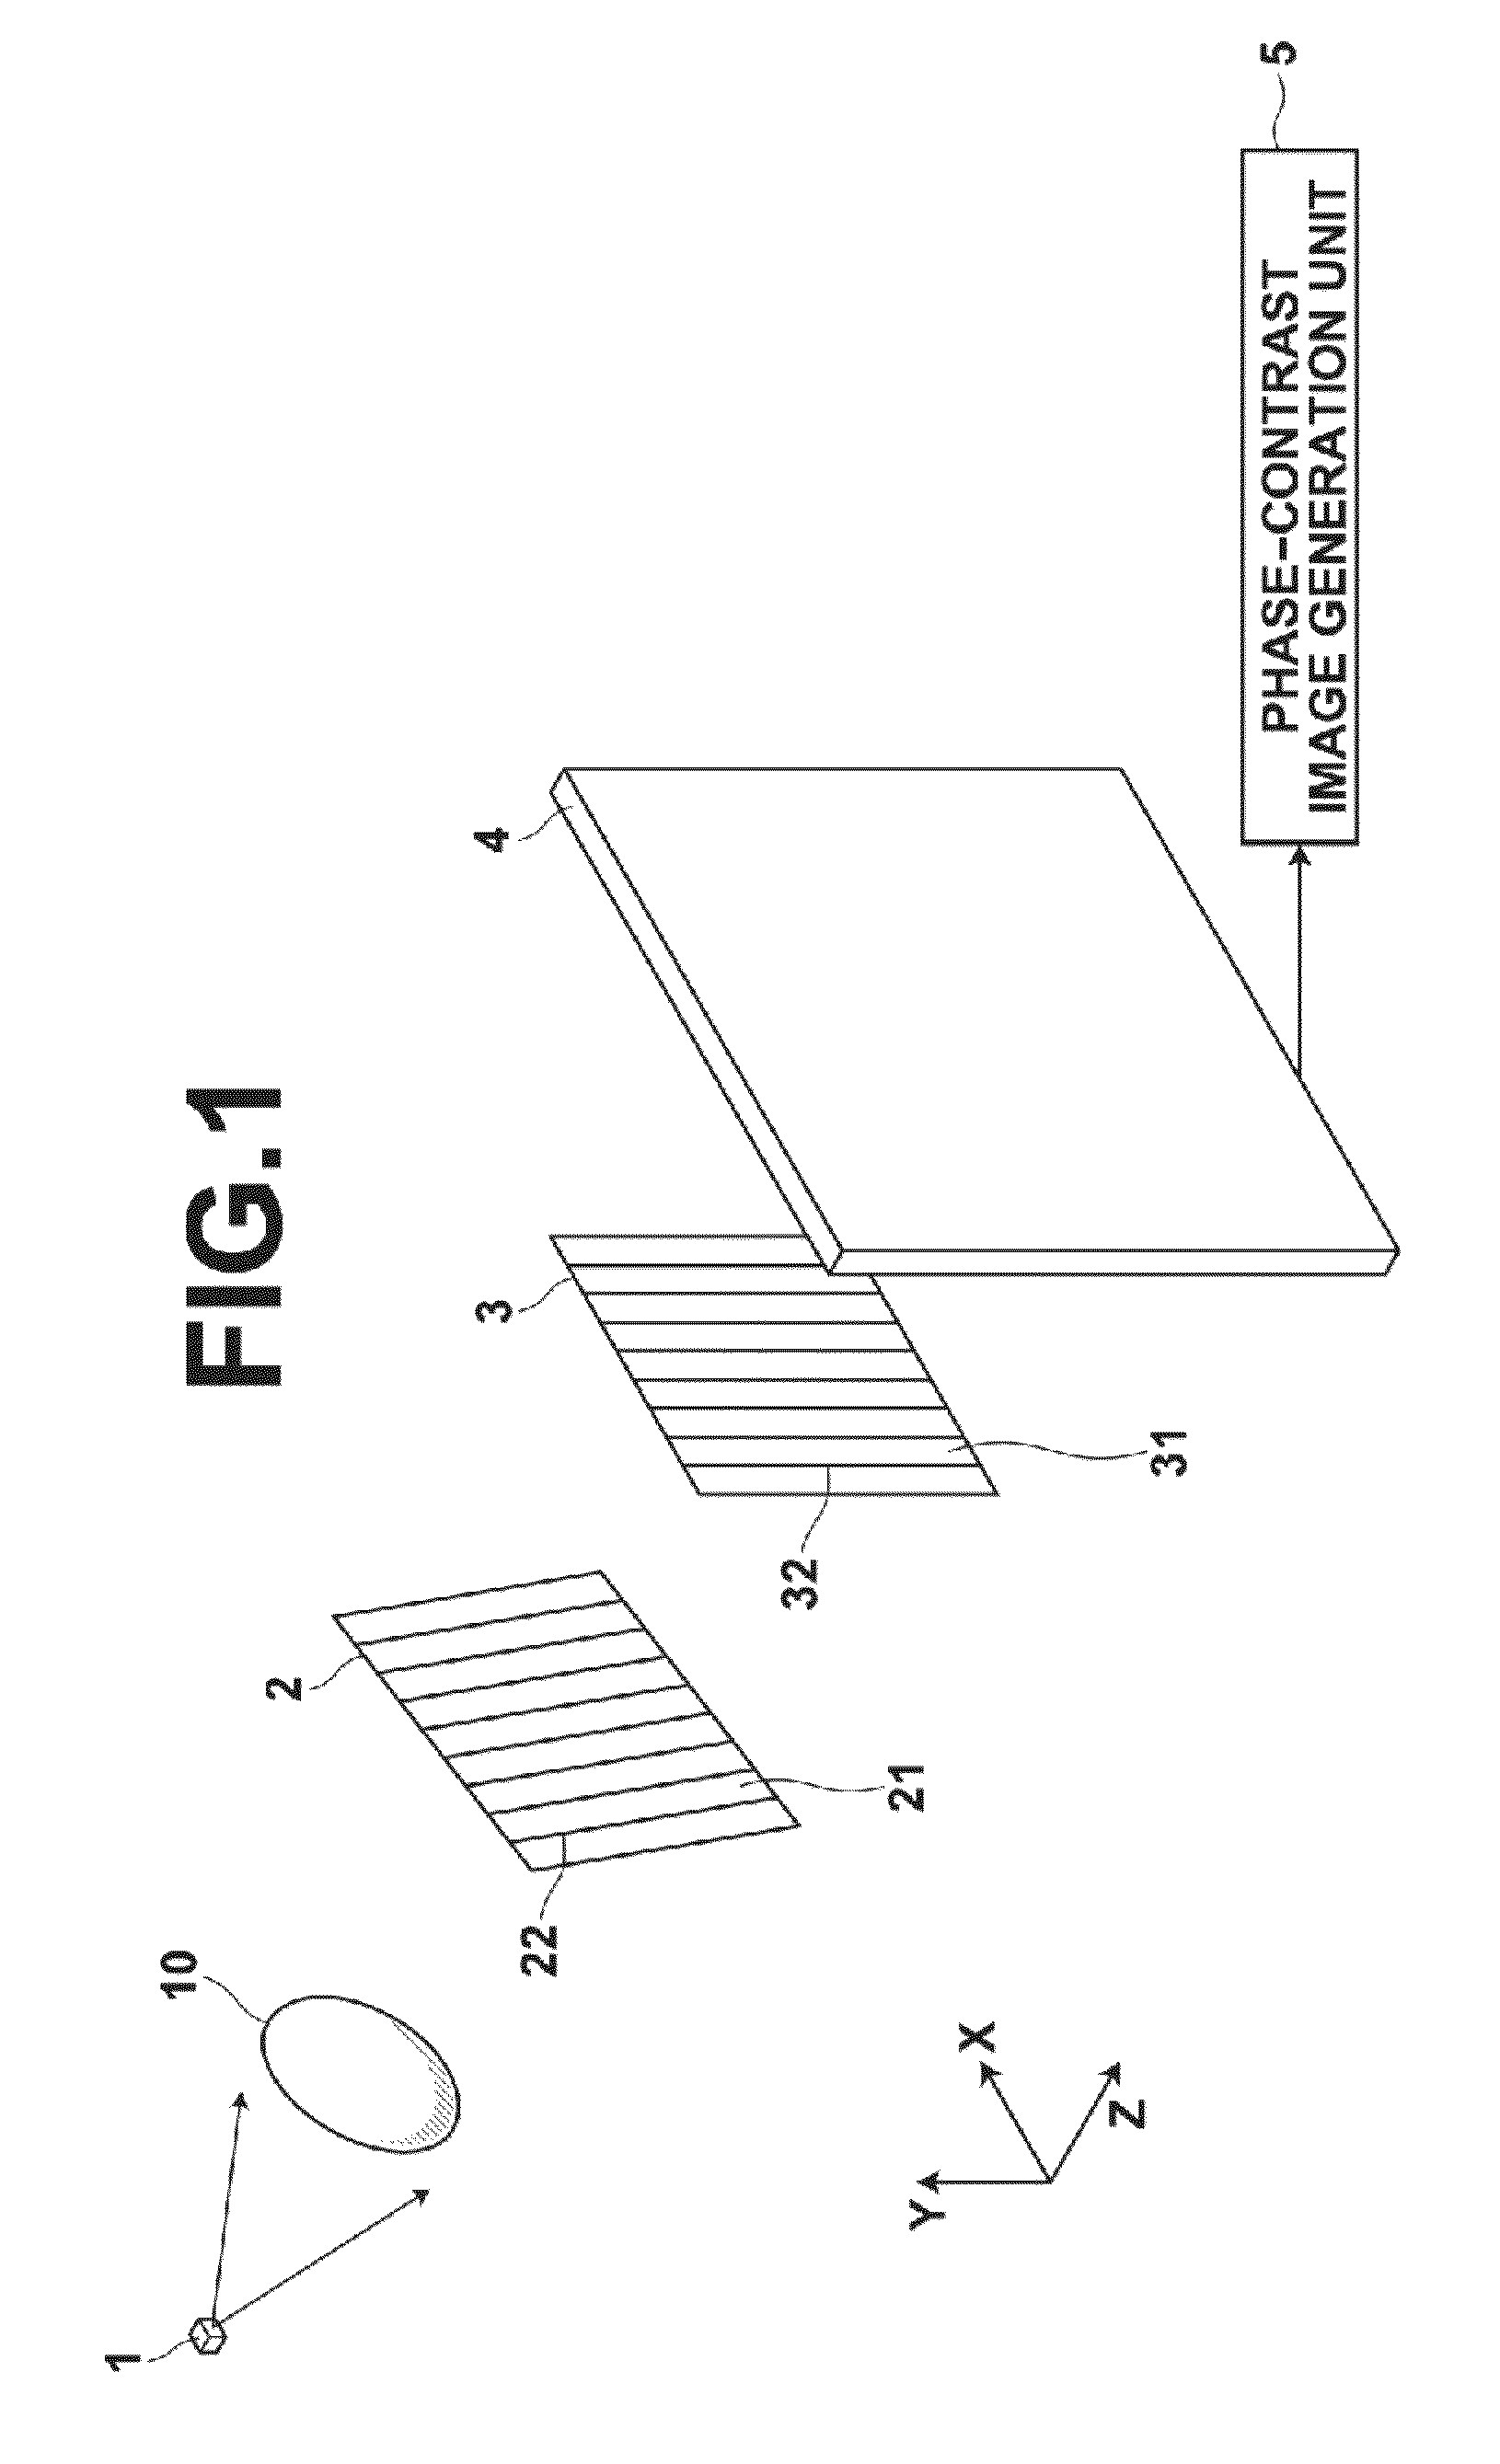 Radiographic phase-contrast imaging apparatus